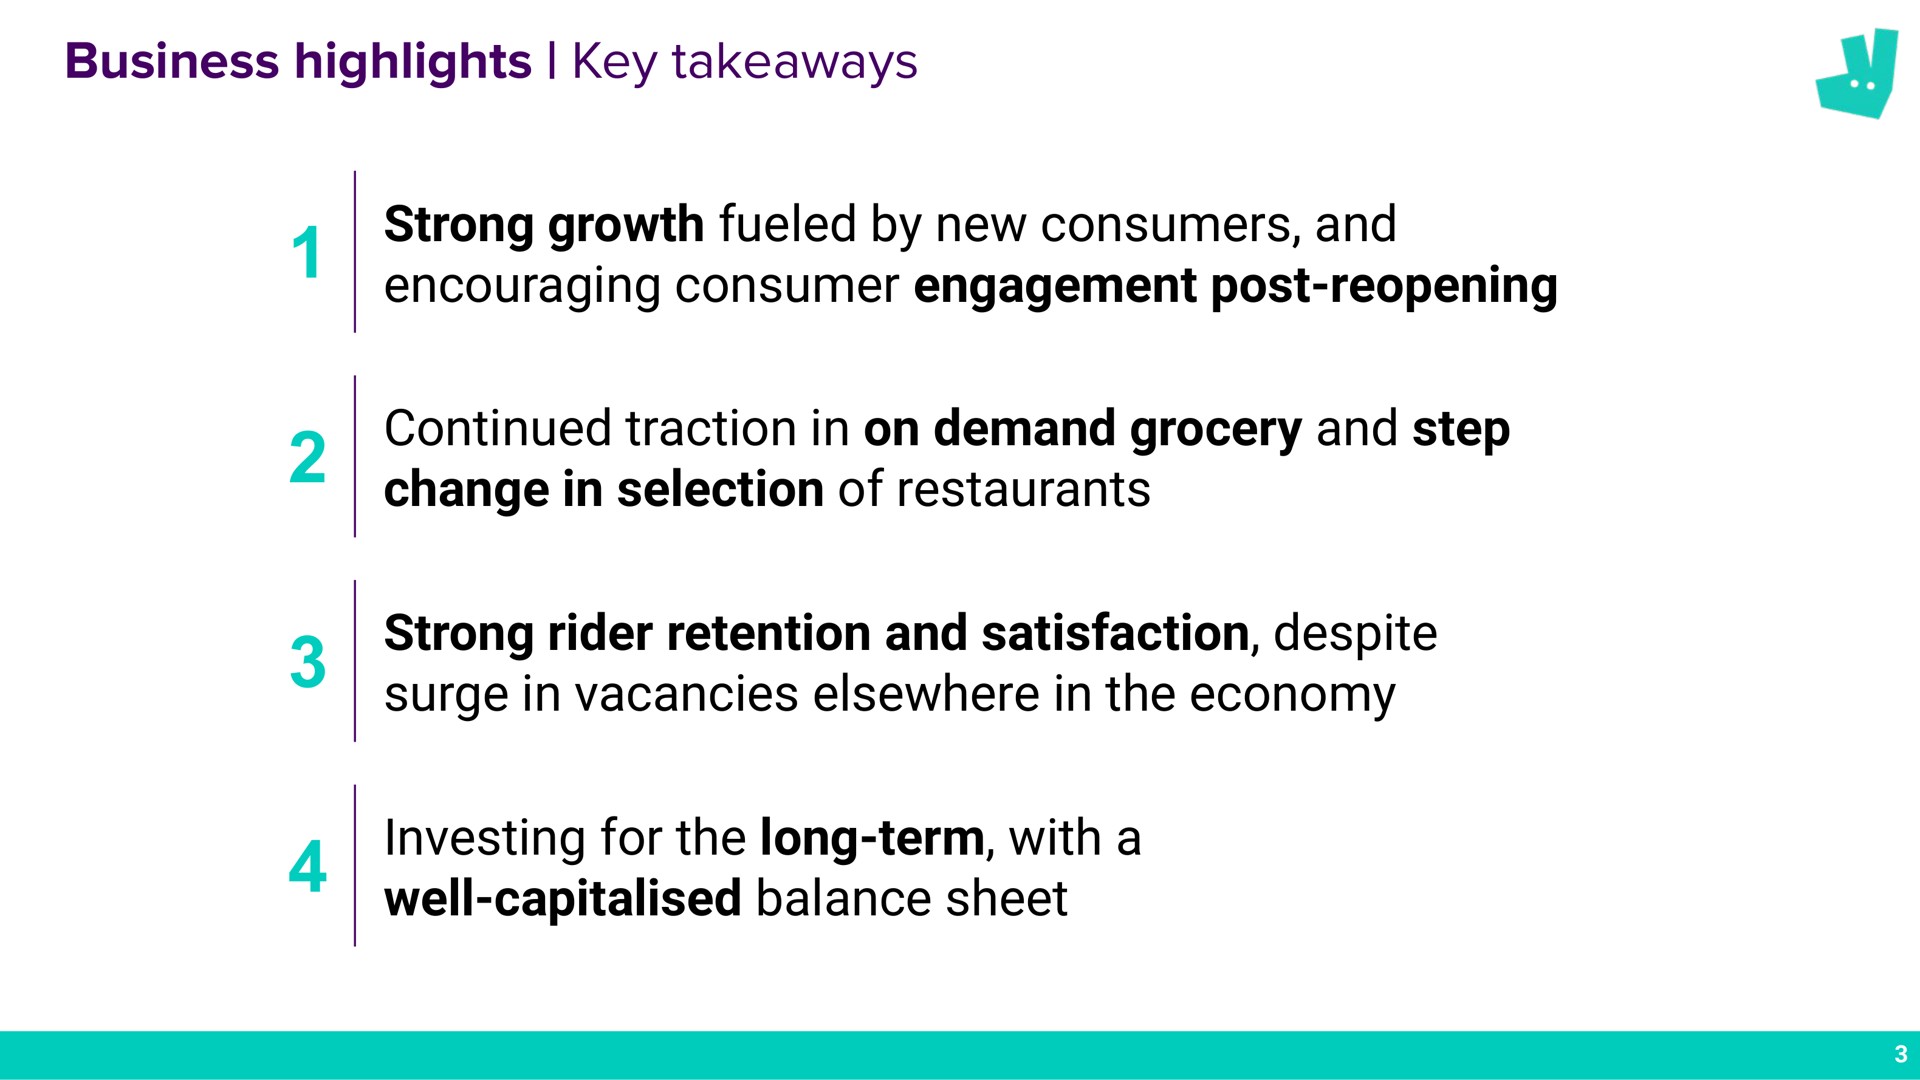 business highlights key strong growth fueled by new consumers and encouraging consumer engagement post reopening continued traction in on demand grocery and step change in selection of restaurants strong rider retention and satisfaction despite surge in vacancies elsewhere in the economy investing for the long term with a well balance sheet | Deliveroo